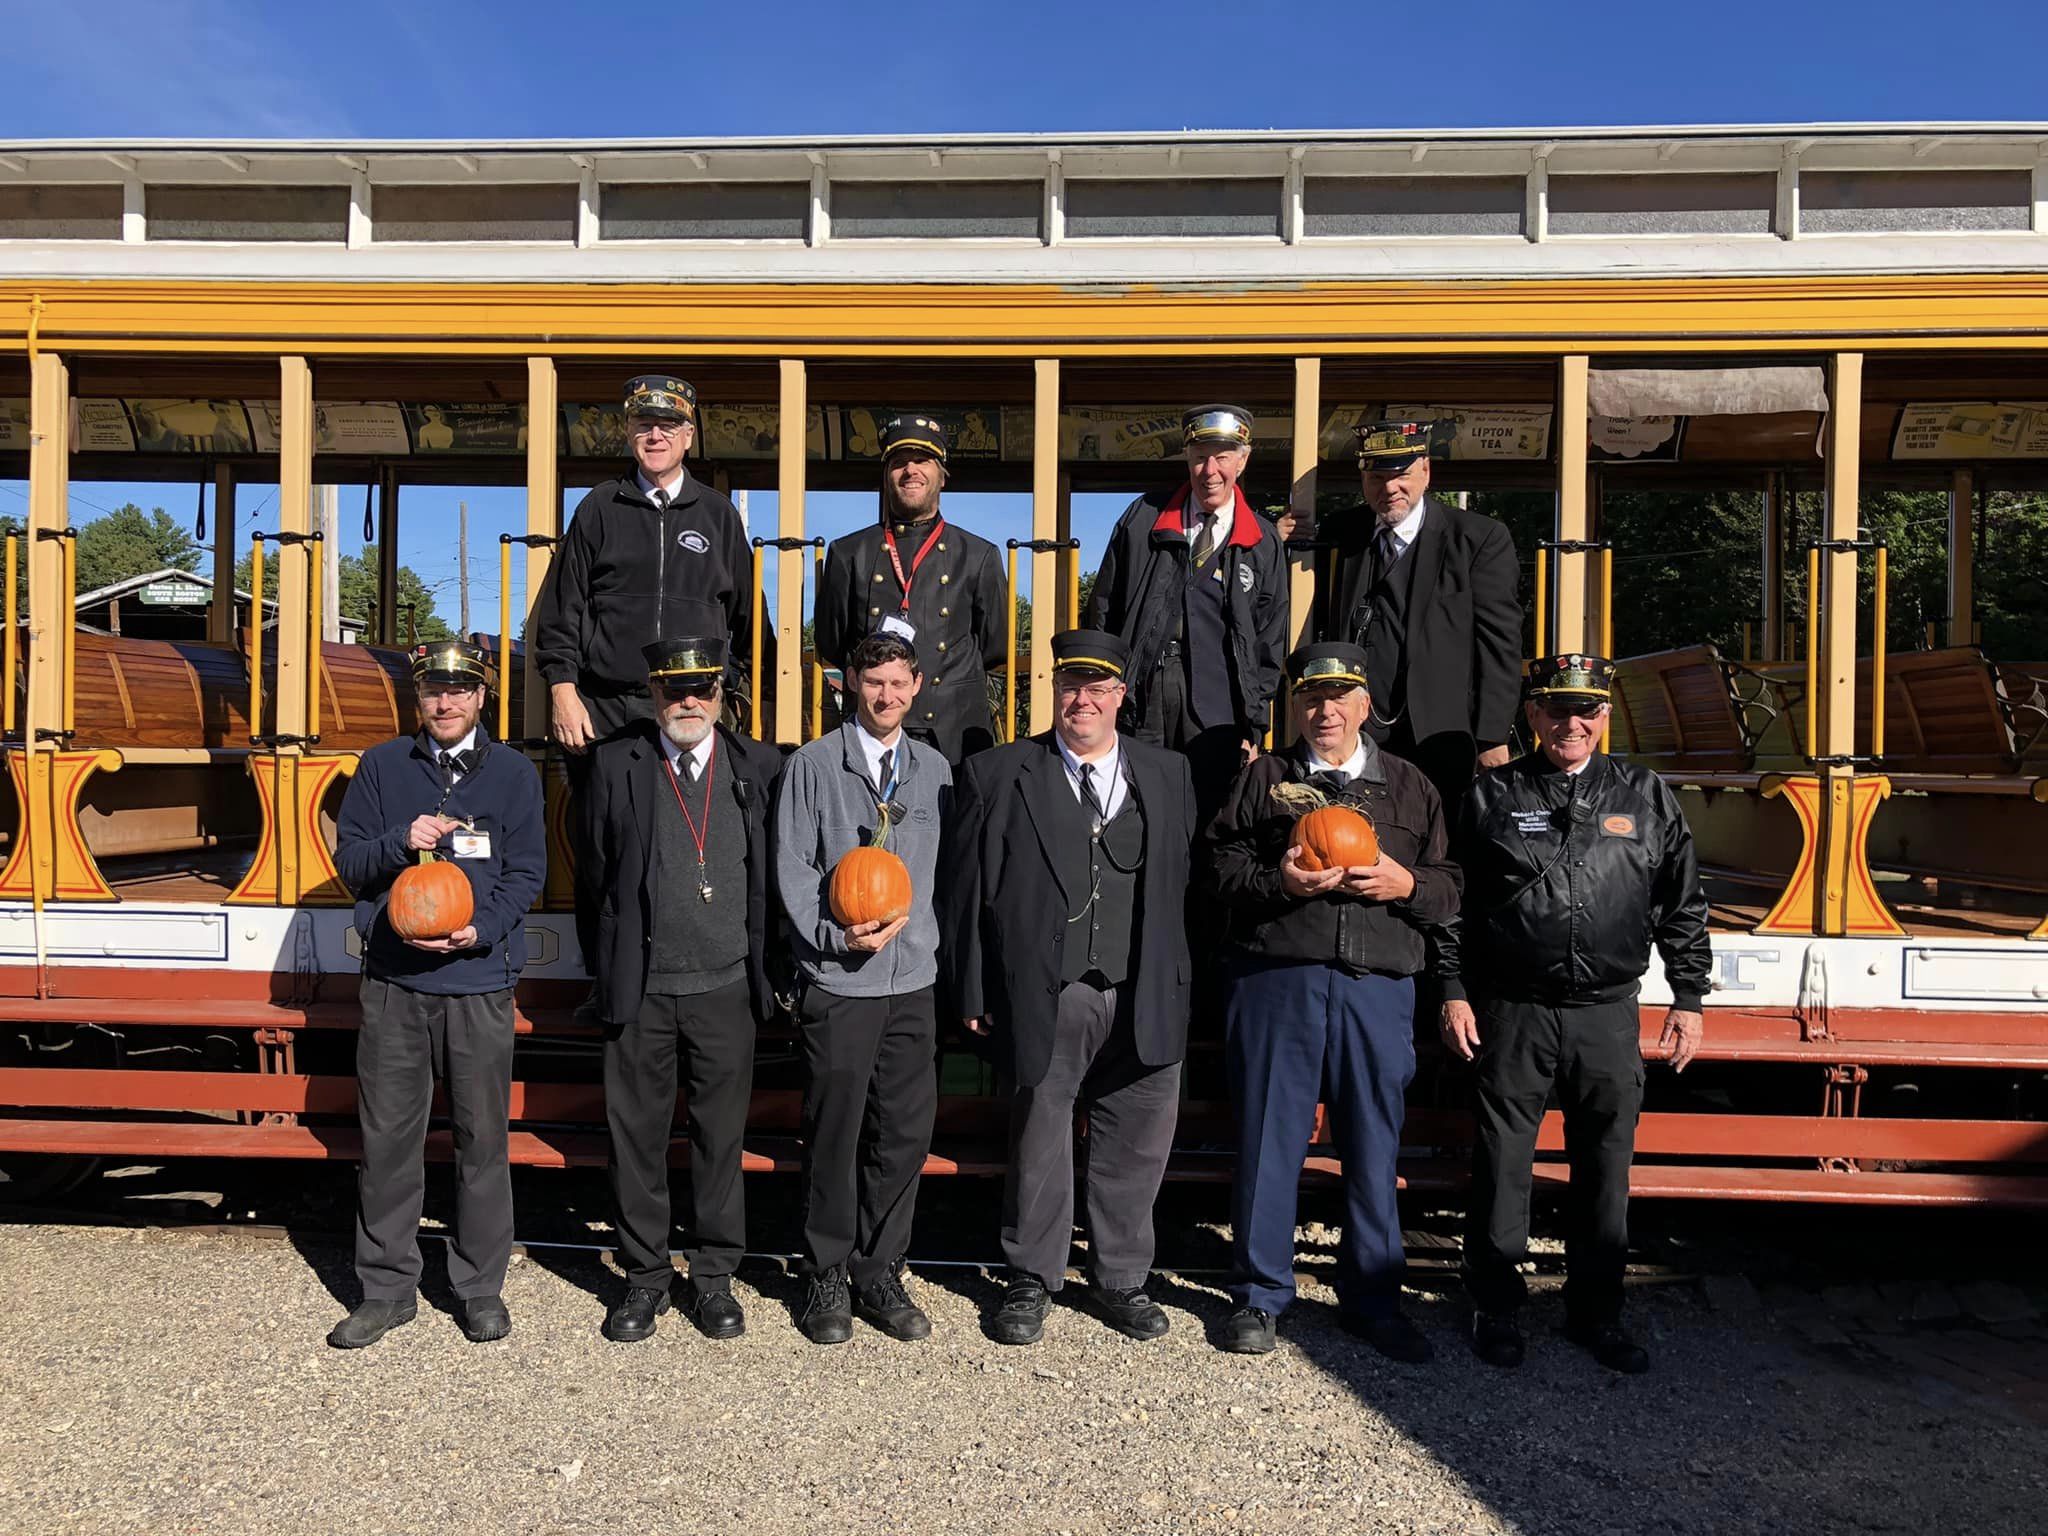 Conductors stand in front of the Pumpkin Patch Trolley Rides at the Seashore Trolley Museum